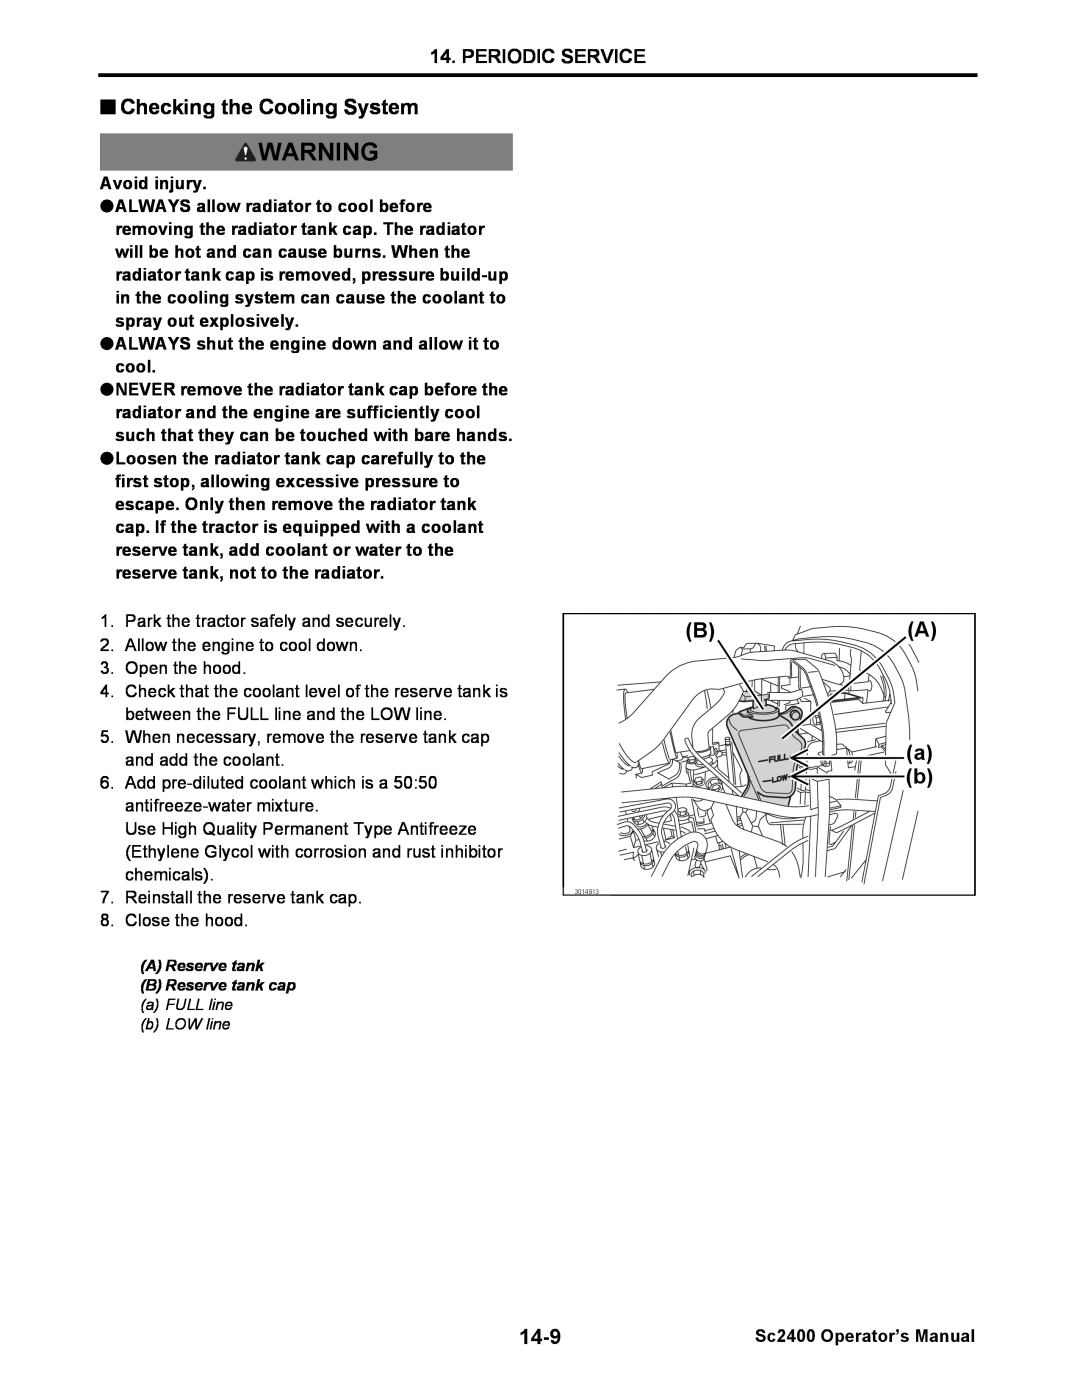 Cub Cadet SC2400 manual Checking the Cooling System, BA a b, 14-9, Periodic Service, Avoid injury, Sc2400 Operator’s Manual 